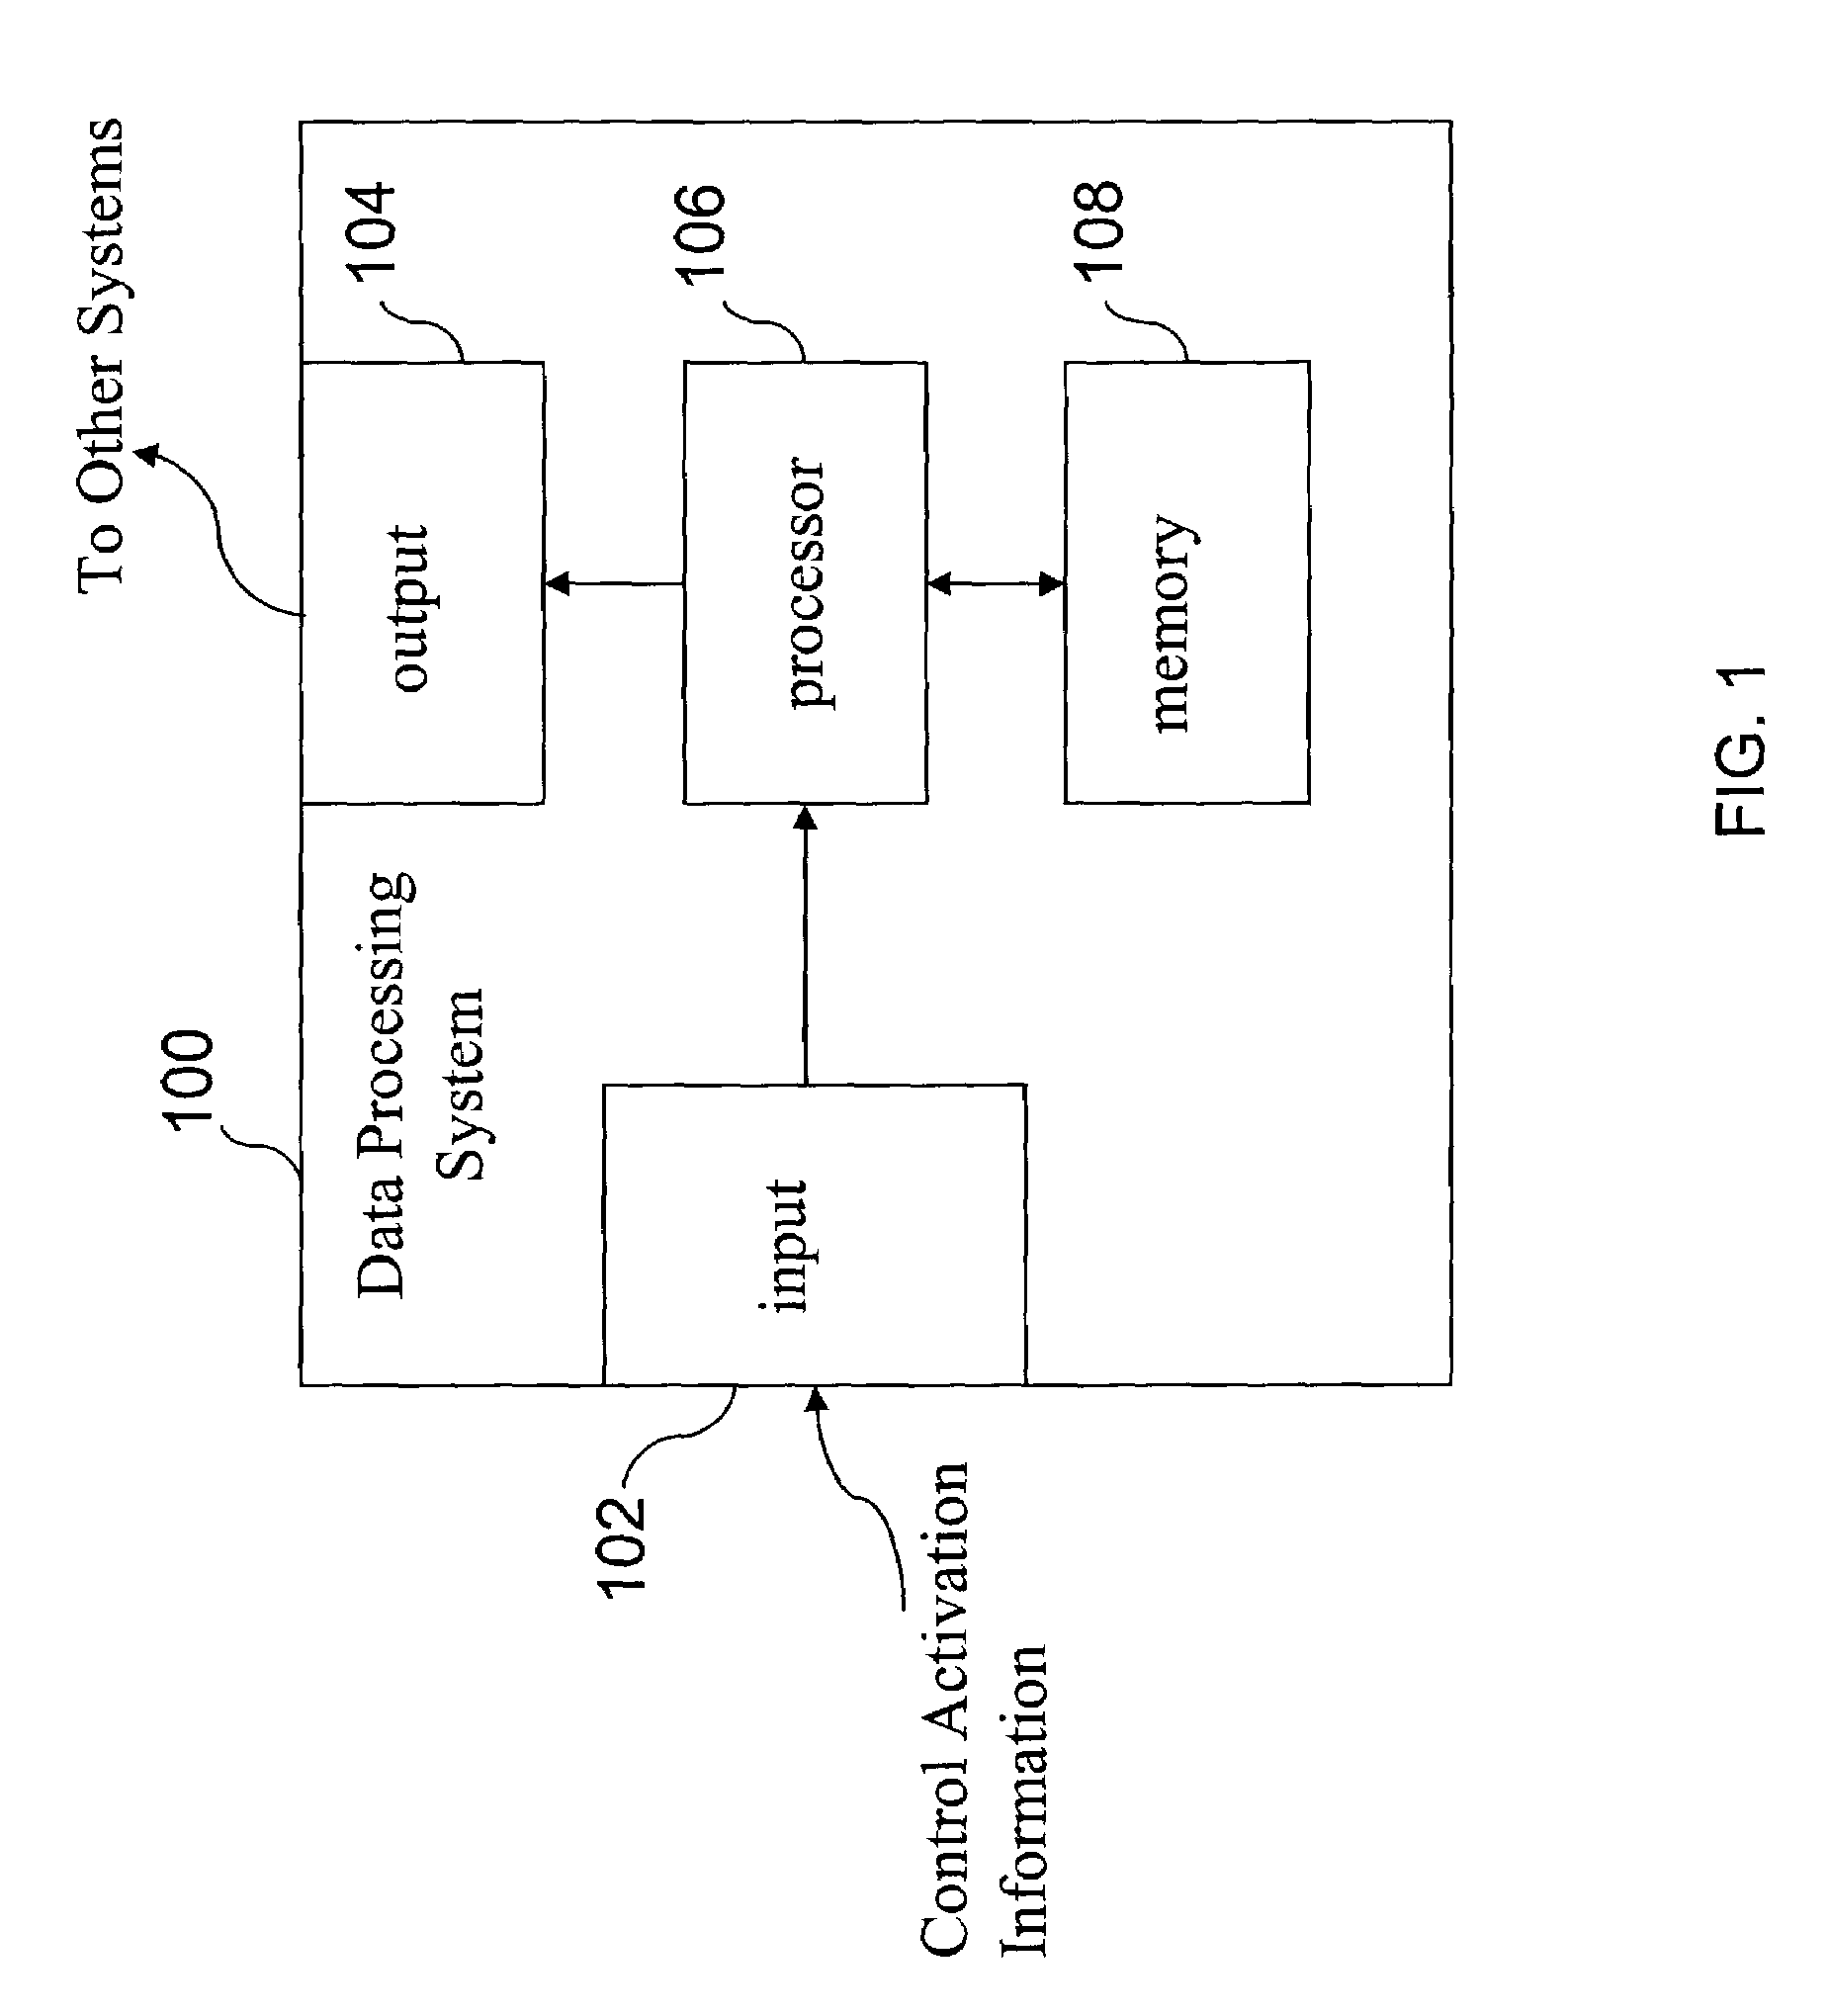 Method and apparatus for calculating an operator distraction level